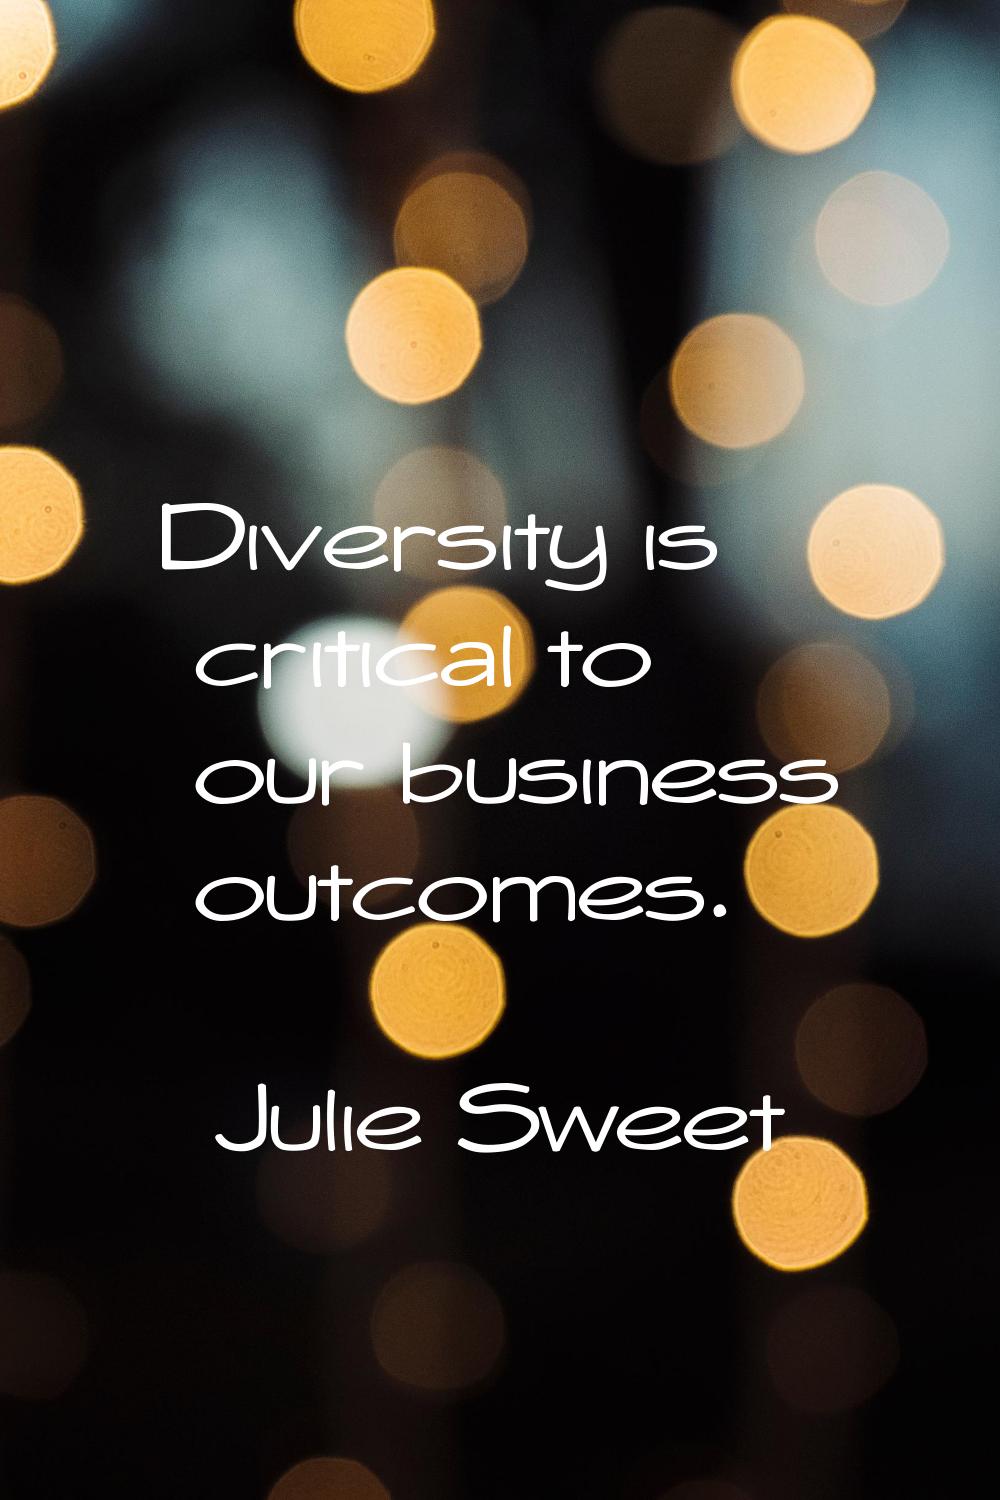 Diversity is critical to our business outcomes.